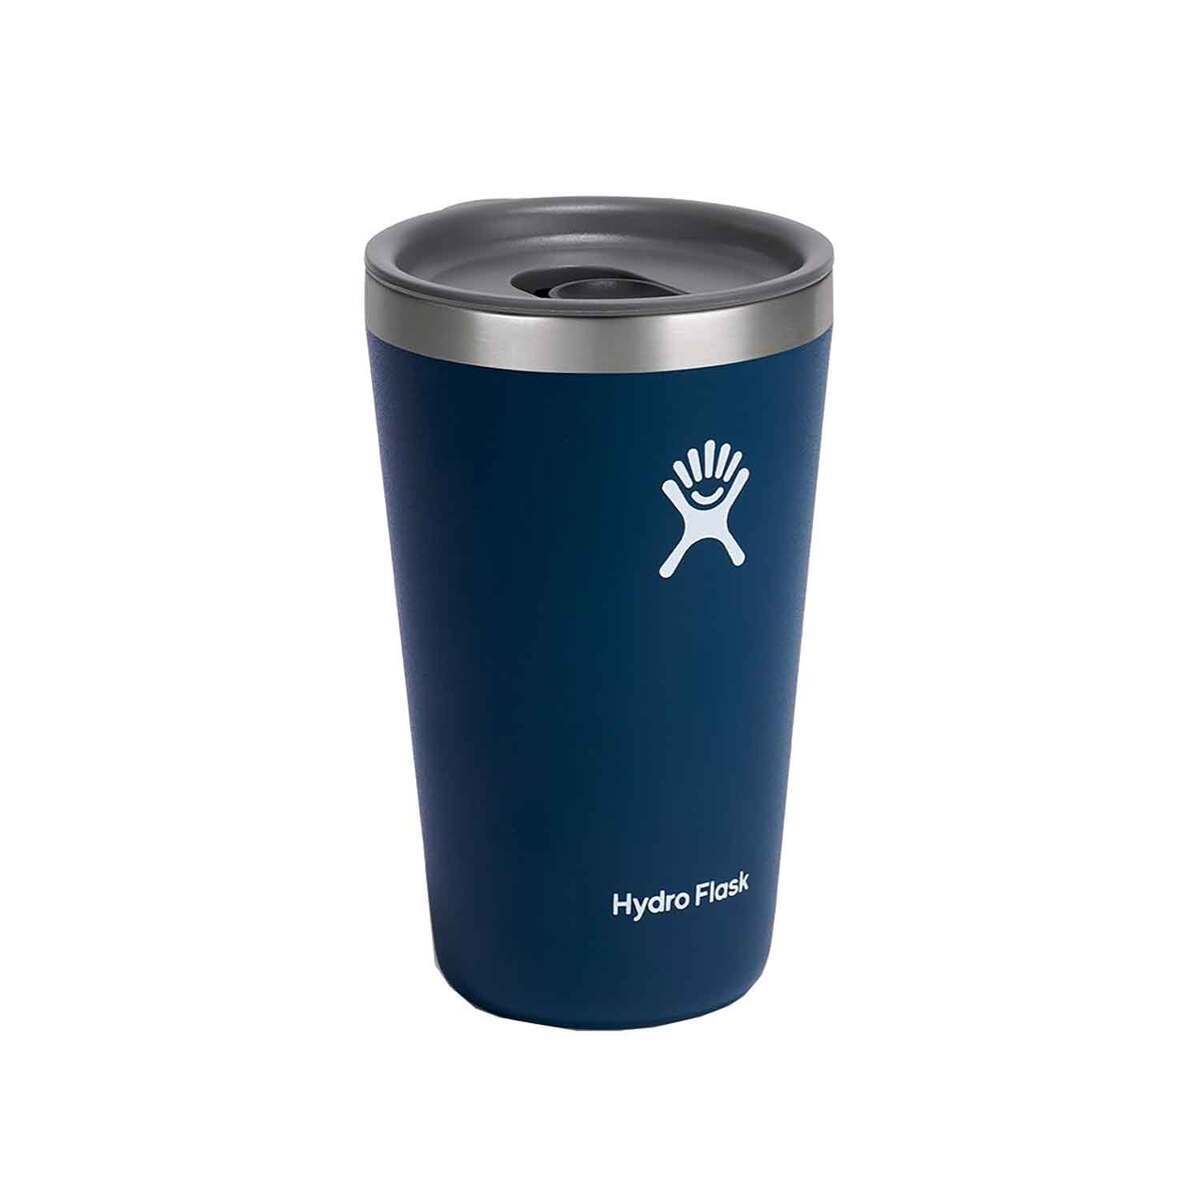 Hydro Flask Cups and Tumblers